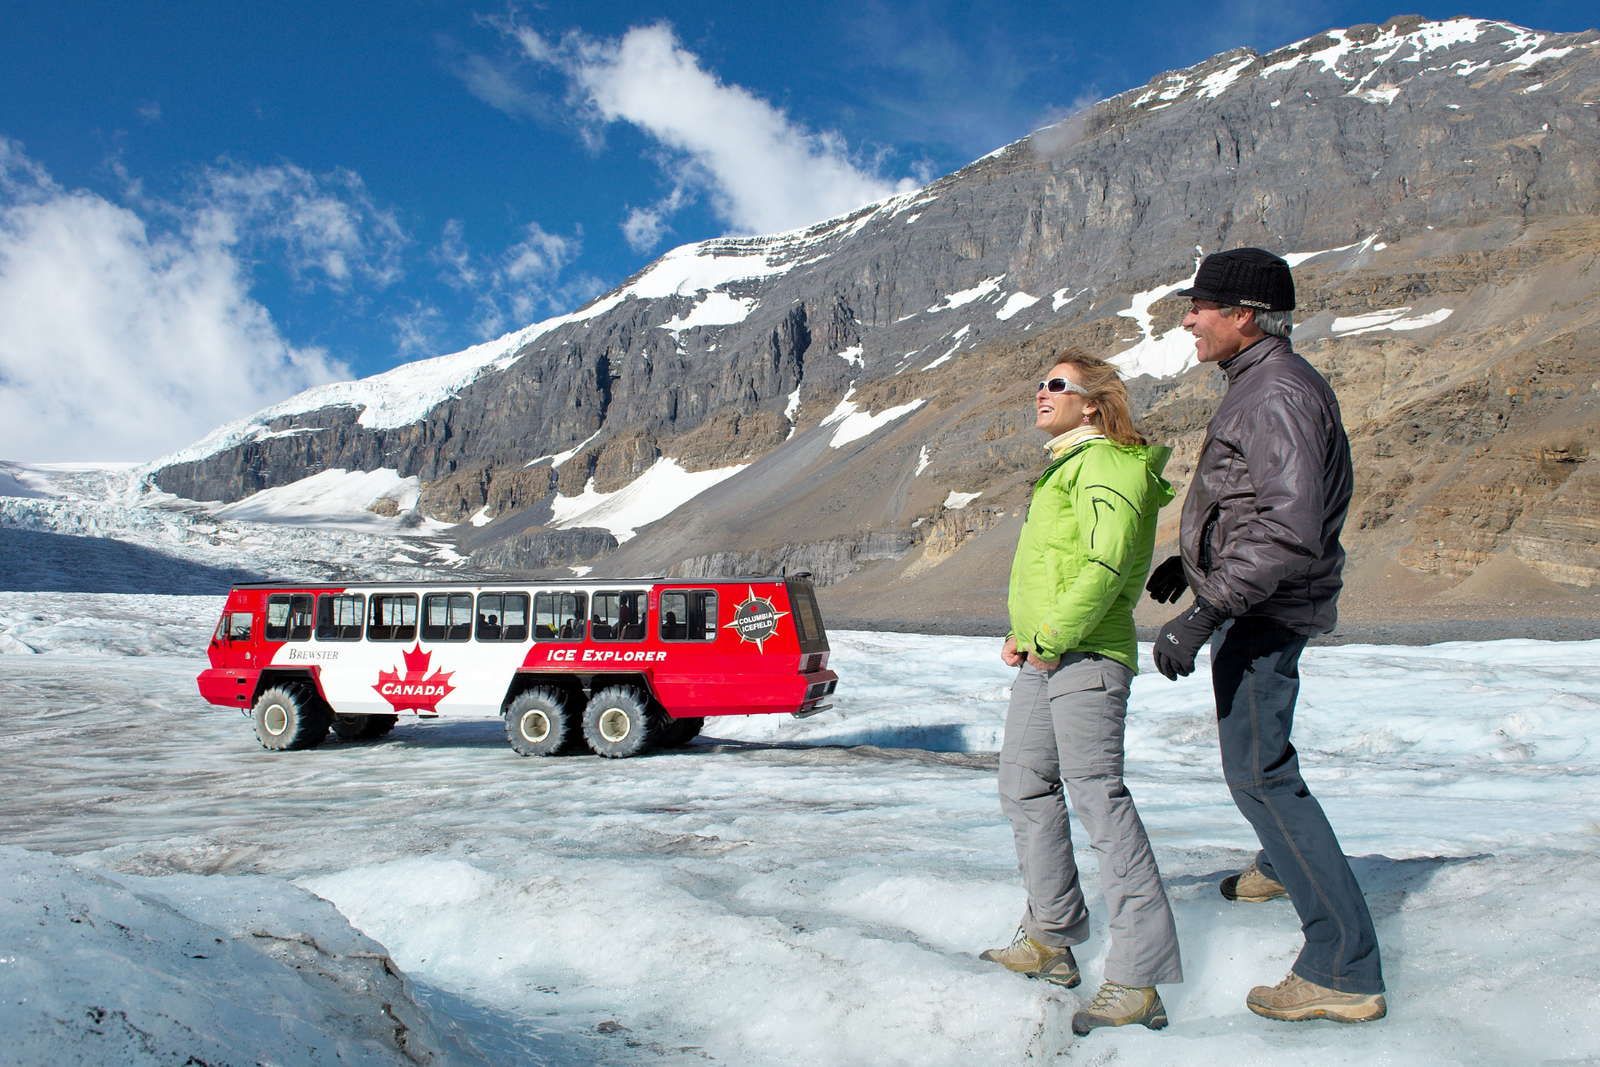 The Majestic Athabasca Glacier: A Natural Wonder of the Canadian Rockies